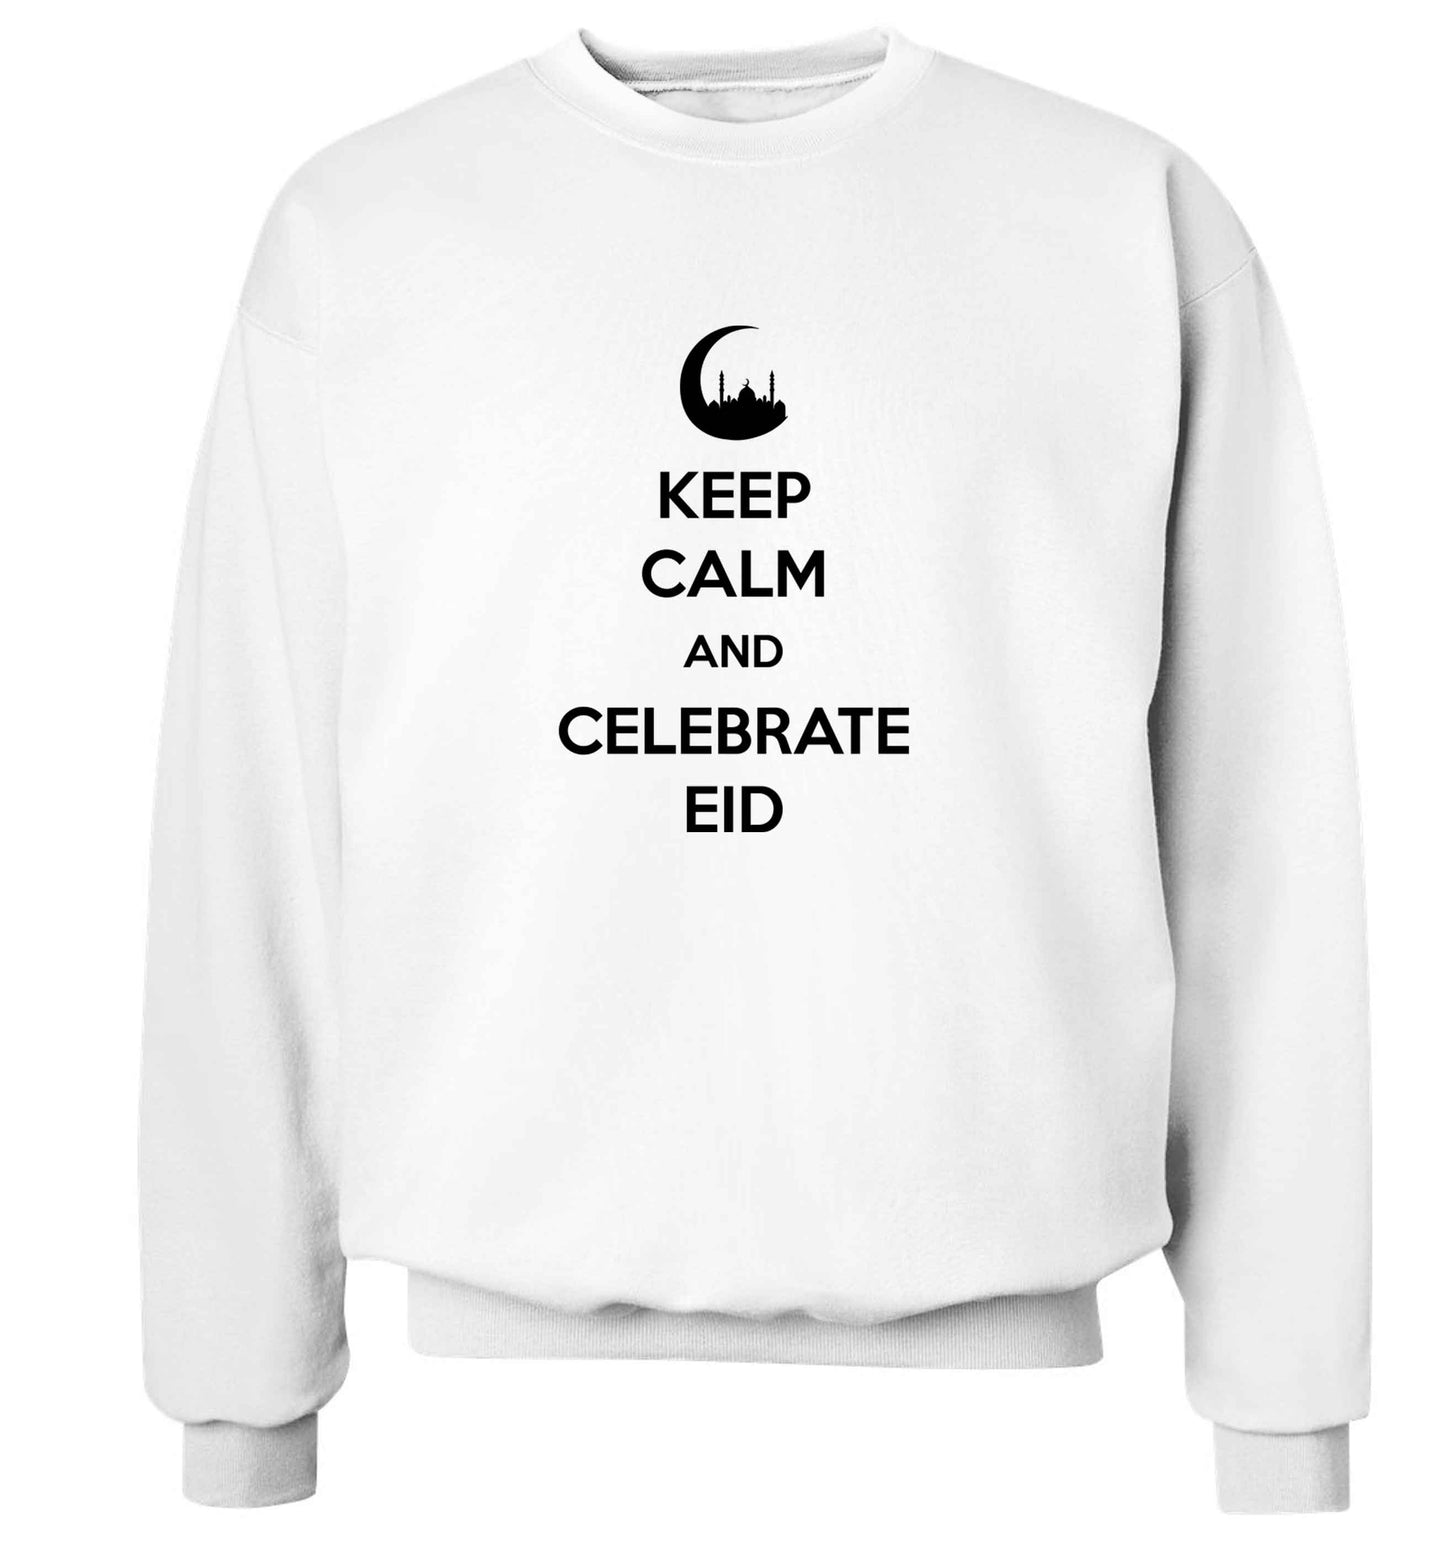 Keep calm and celebrate Eid adult's unisex white sweater 2XL